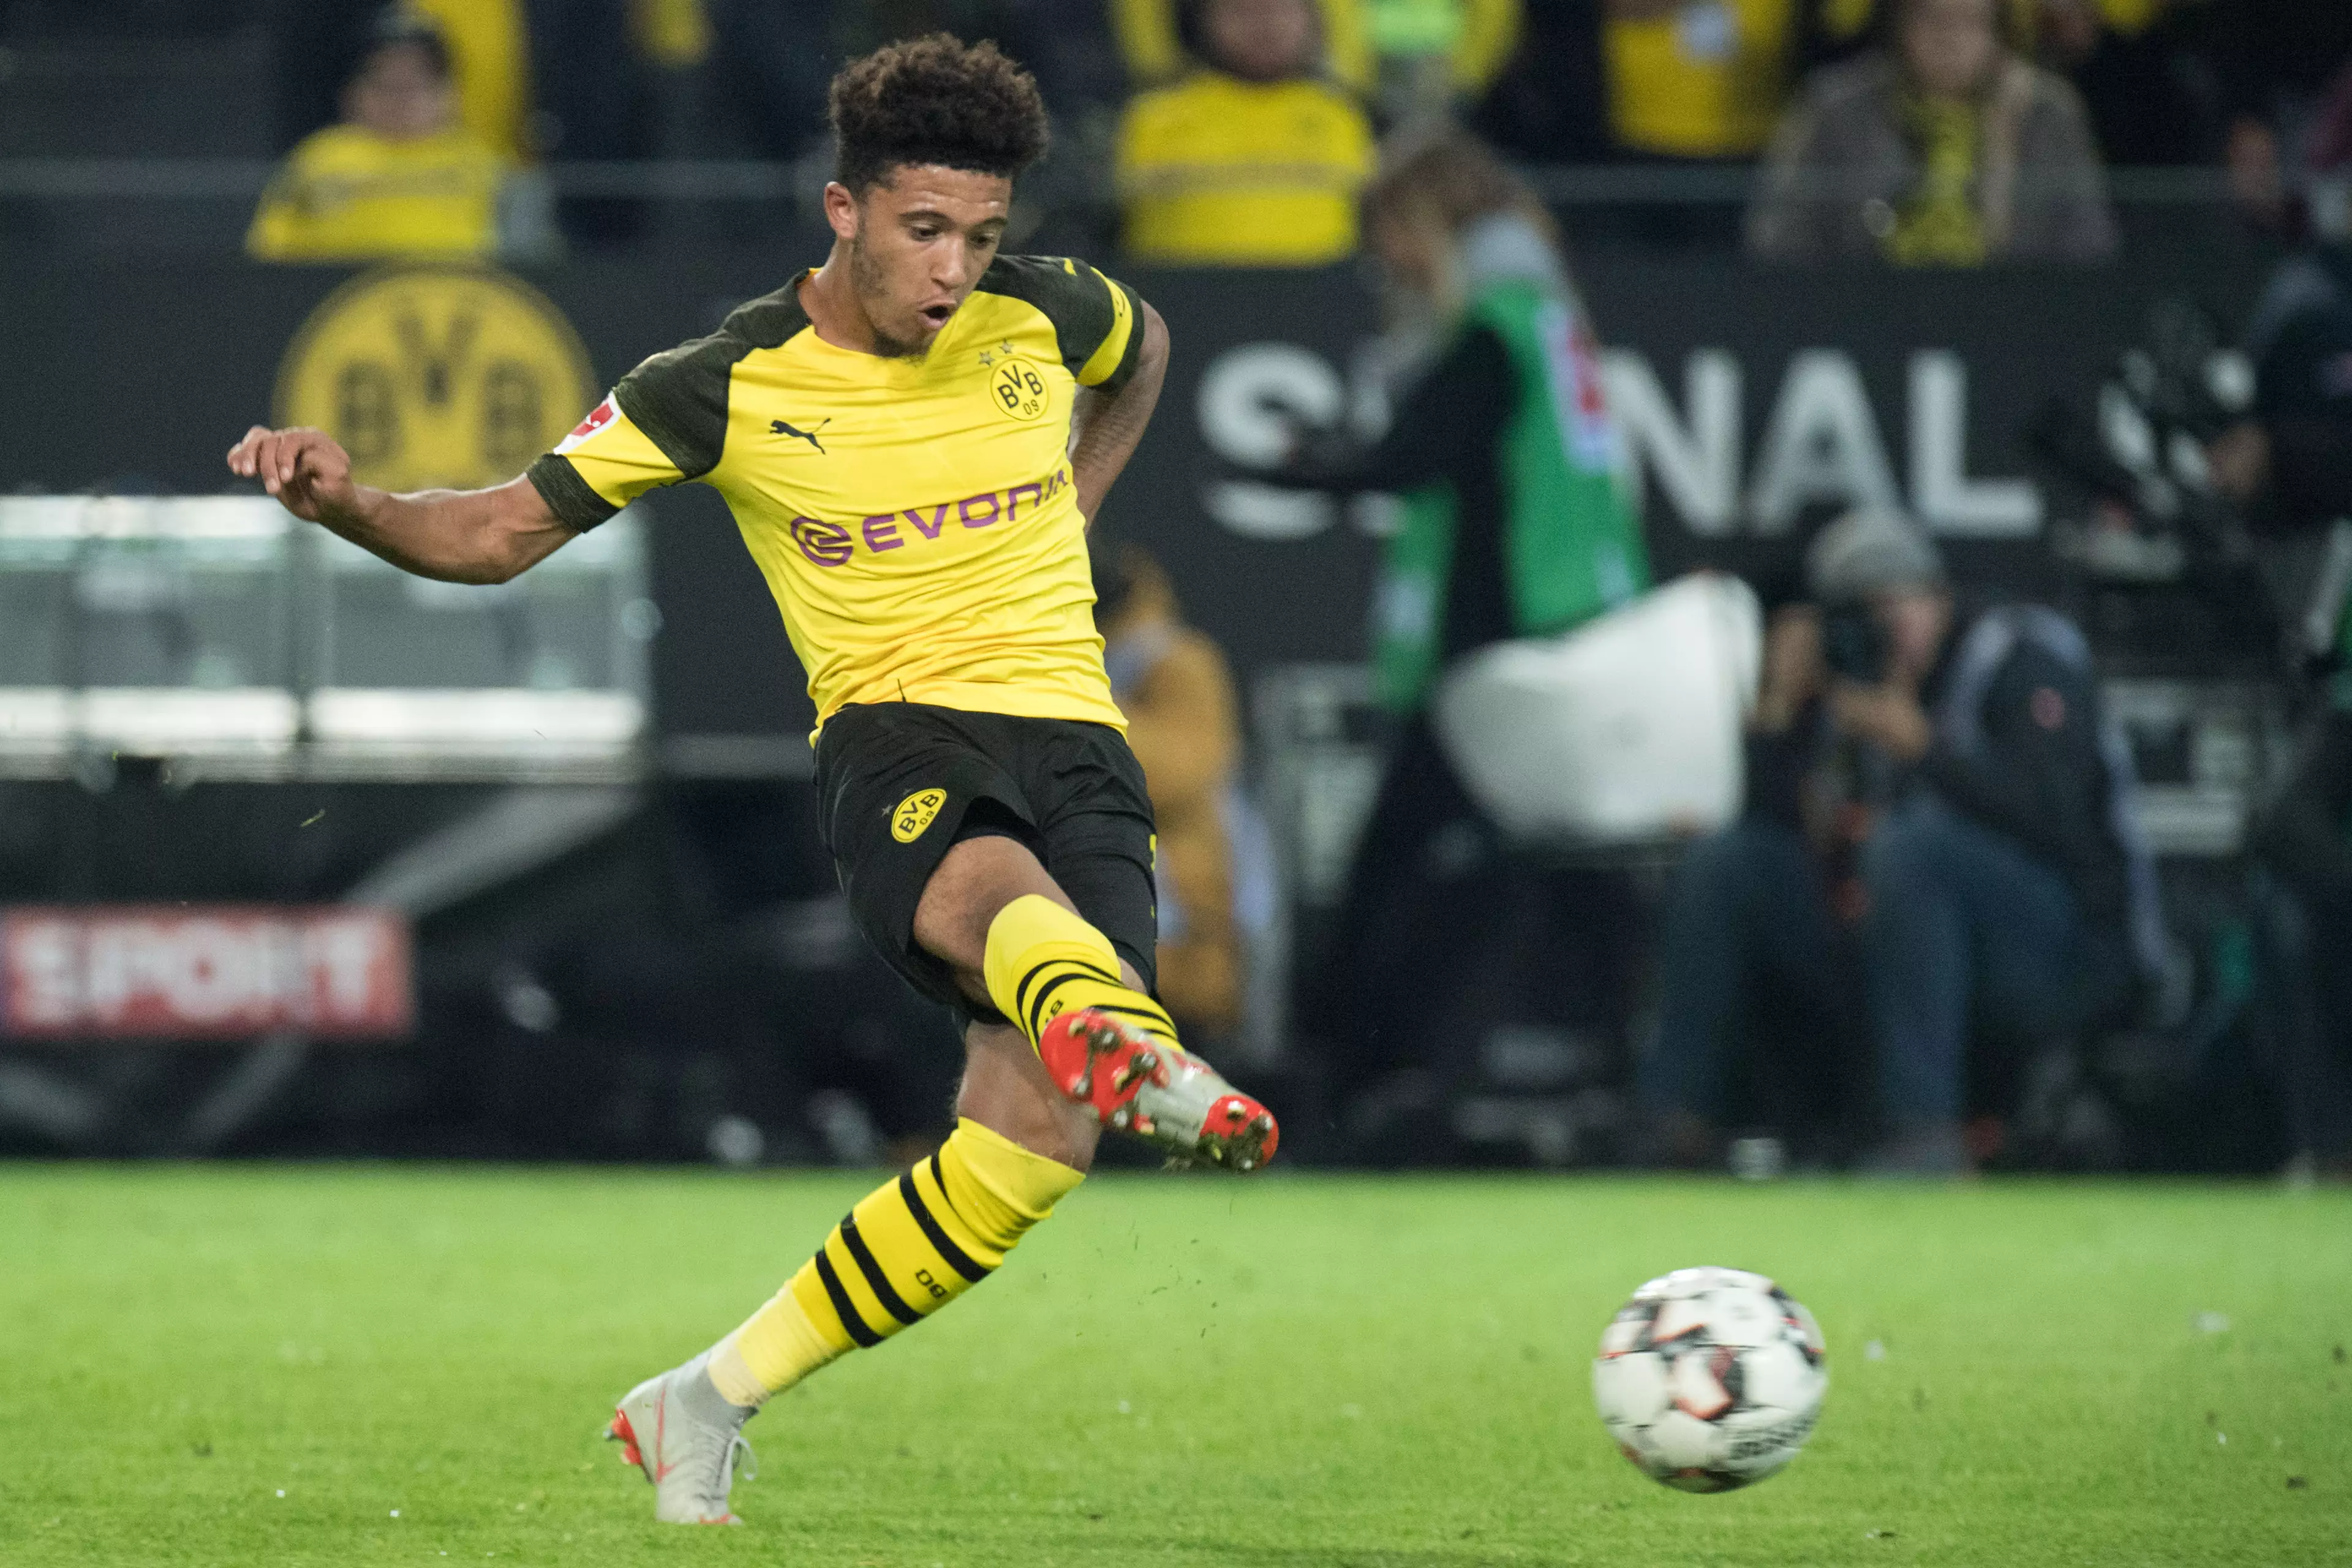 Sancho is United's number one target but could cost up to £100 million. Image: PA